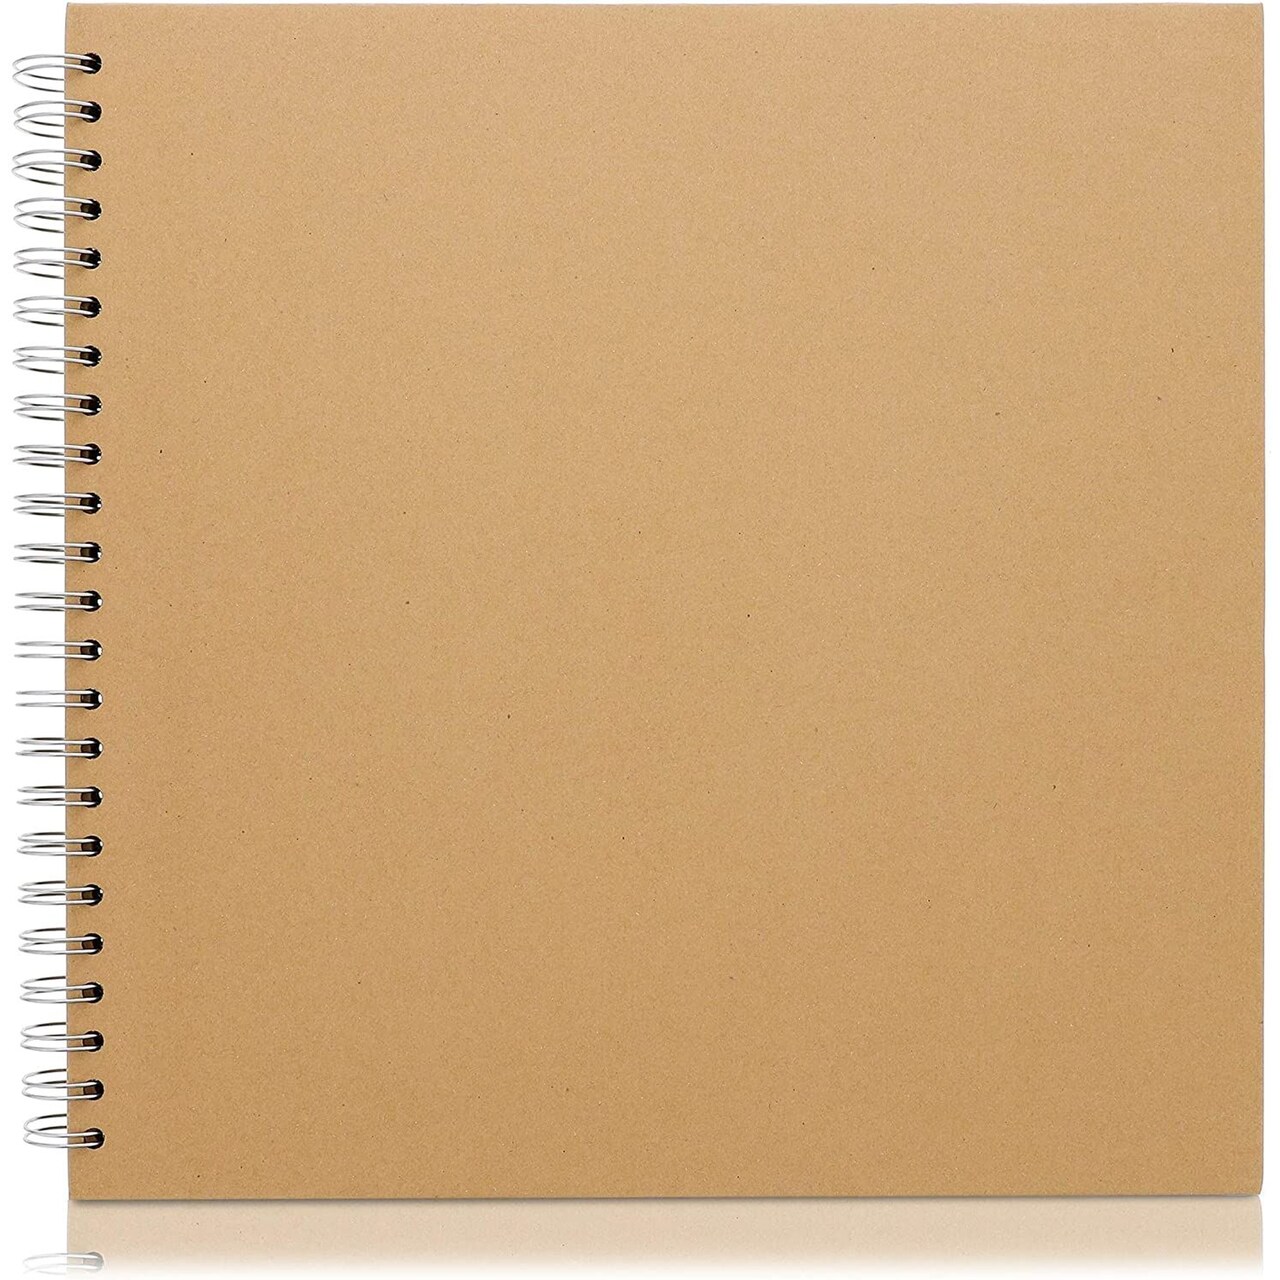 12x12 Scrapbook Album Hardcover (Blank), Kraft Paper Material Spiral Bound  Sketchbook for Drawing, Writing, Arts and Crafts Projects, Home, Office,  School (40 Sheets Total)